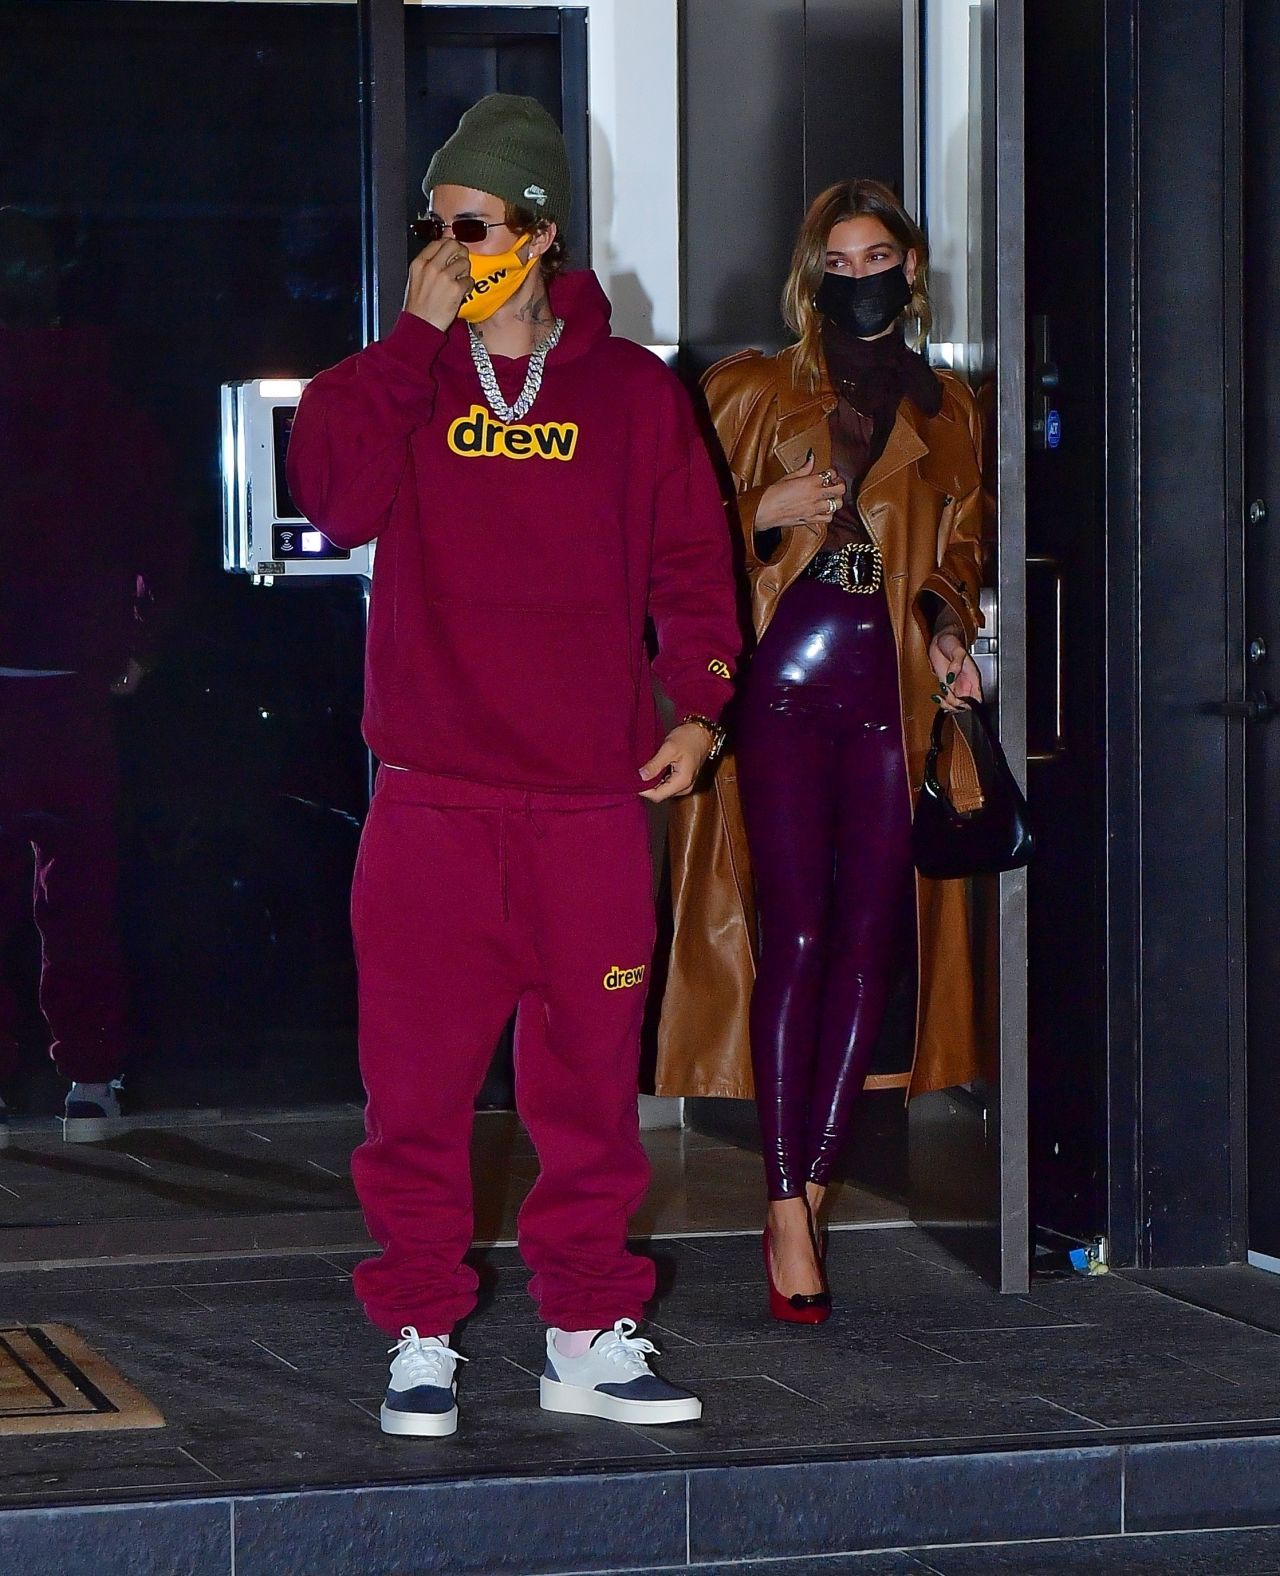 hailey-bieber-and-justin-bieber-night-out-new-york-city-10-15-2020-0.jpg